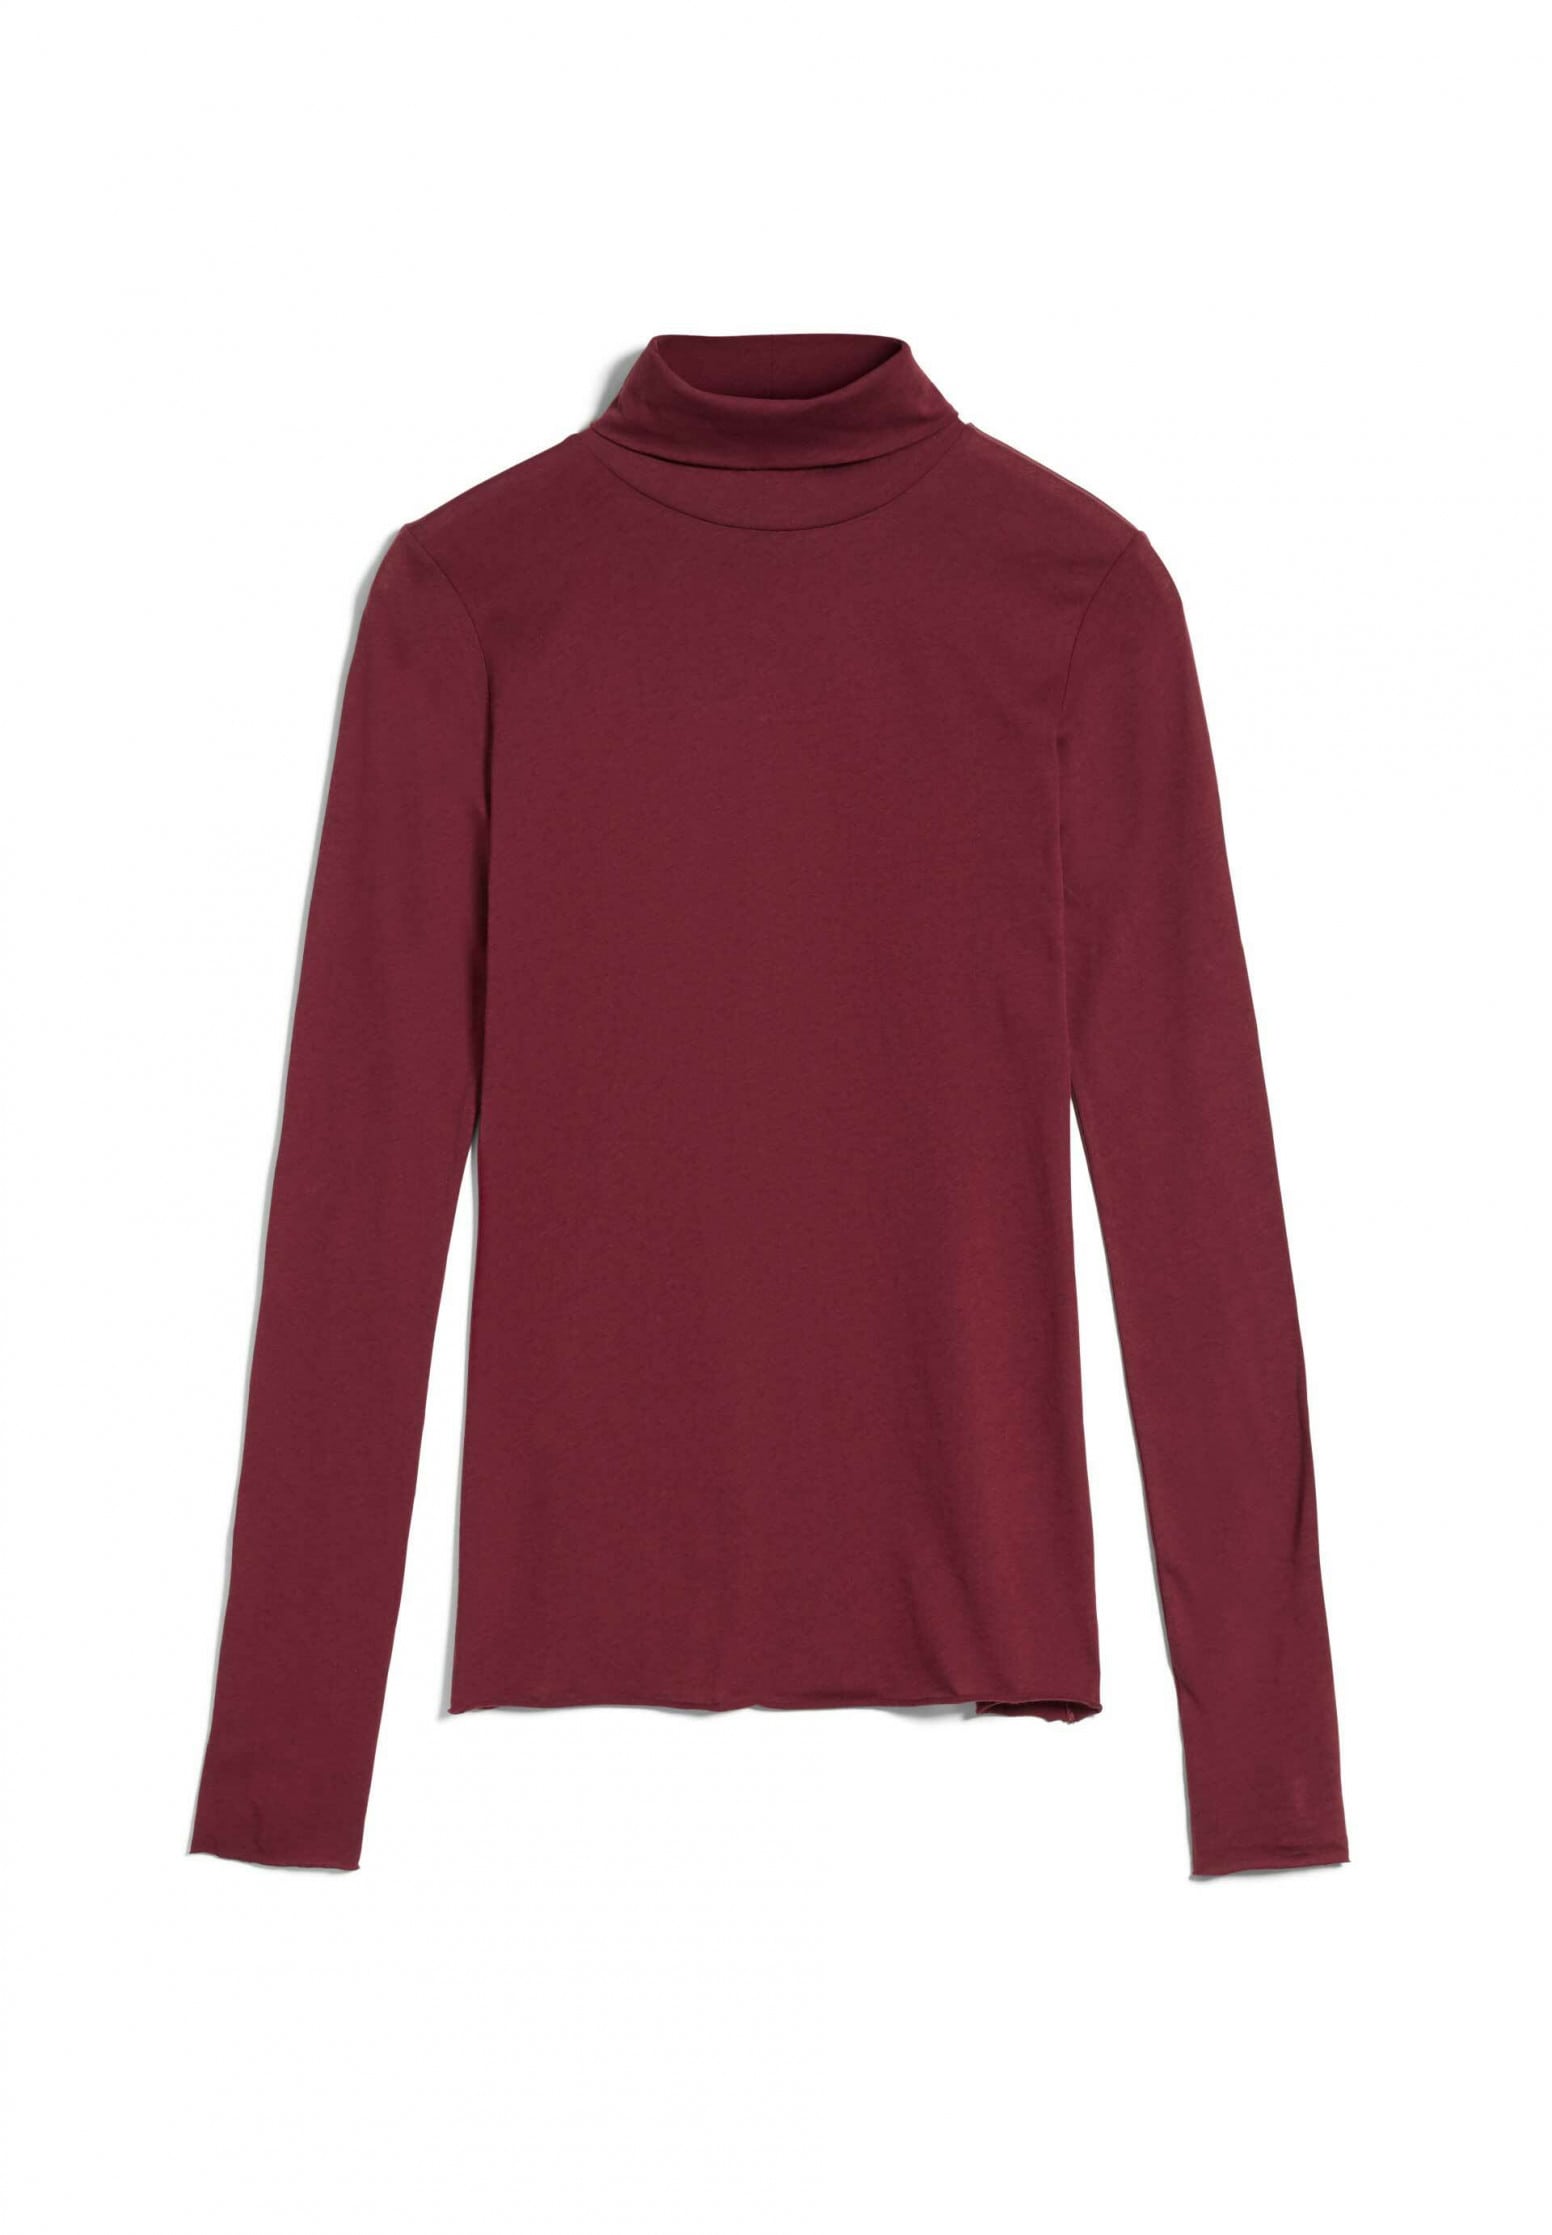 MALENAA Turtleneck Pullover Ruby Red